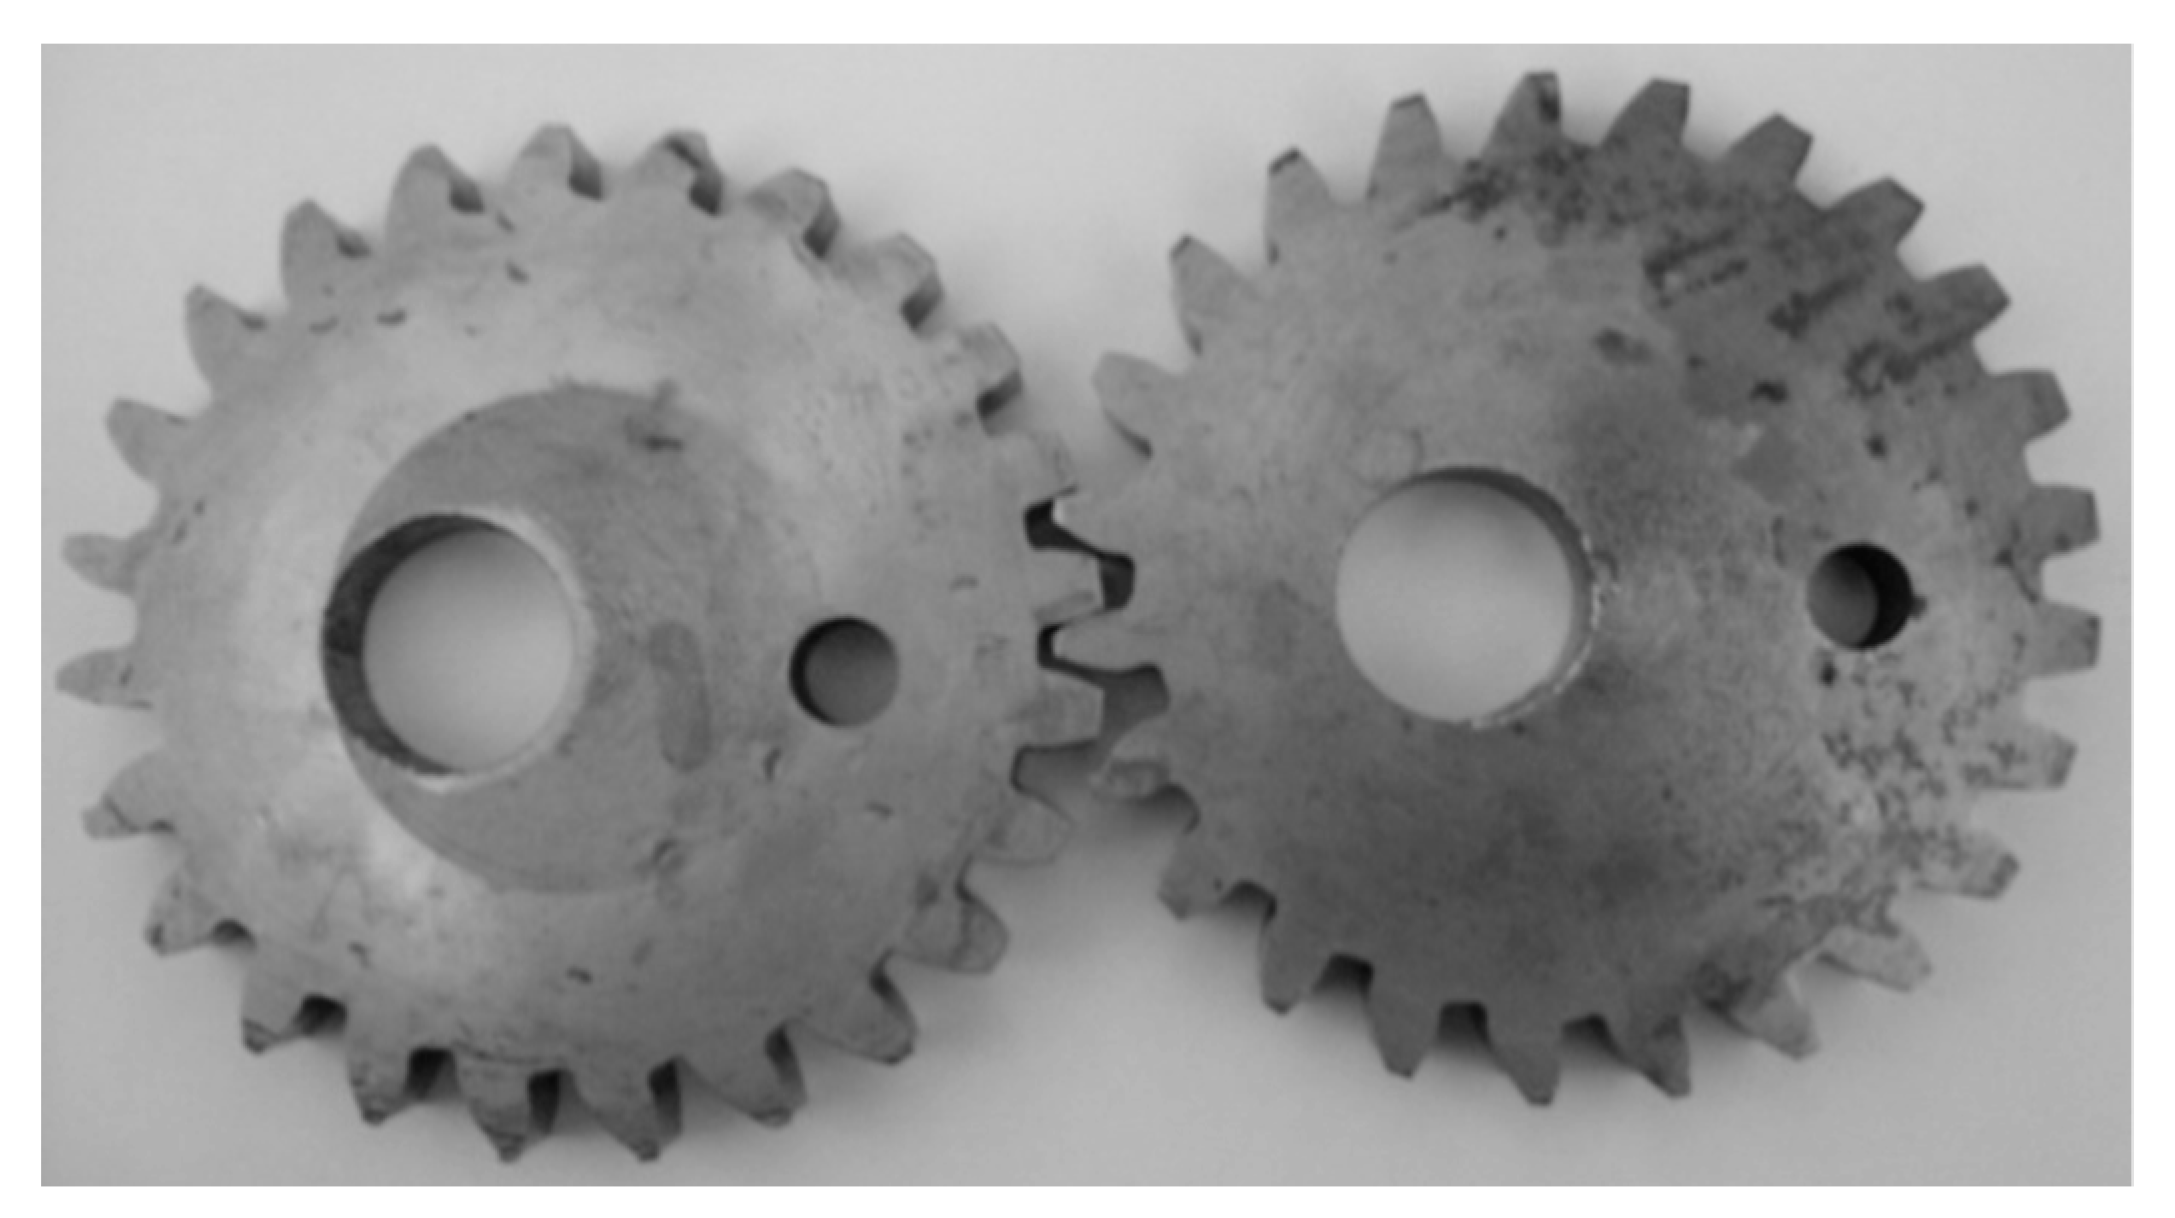 Noncircular bevel gears with cosine tooth profile and helix tooth